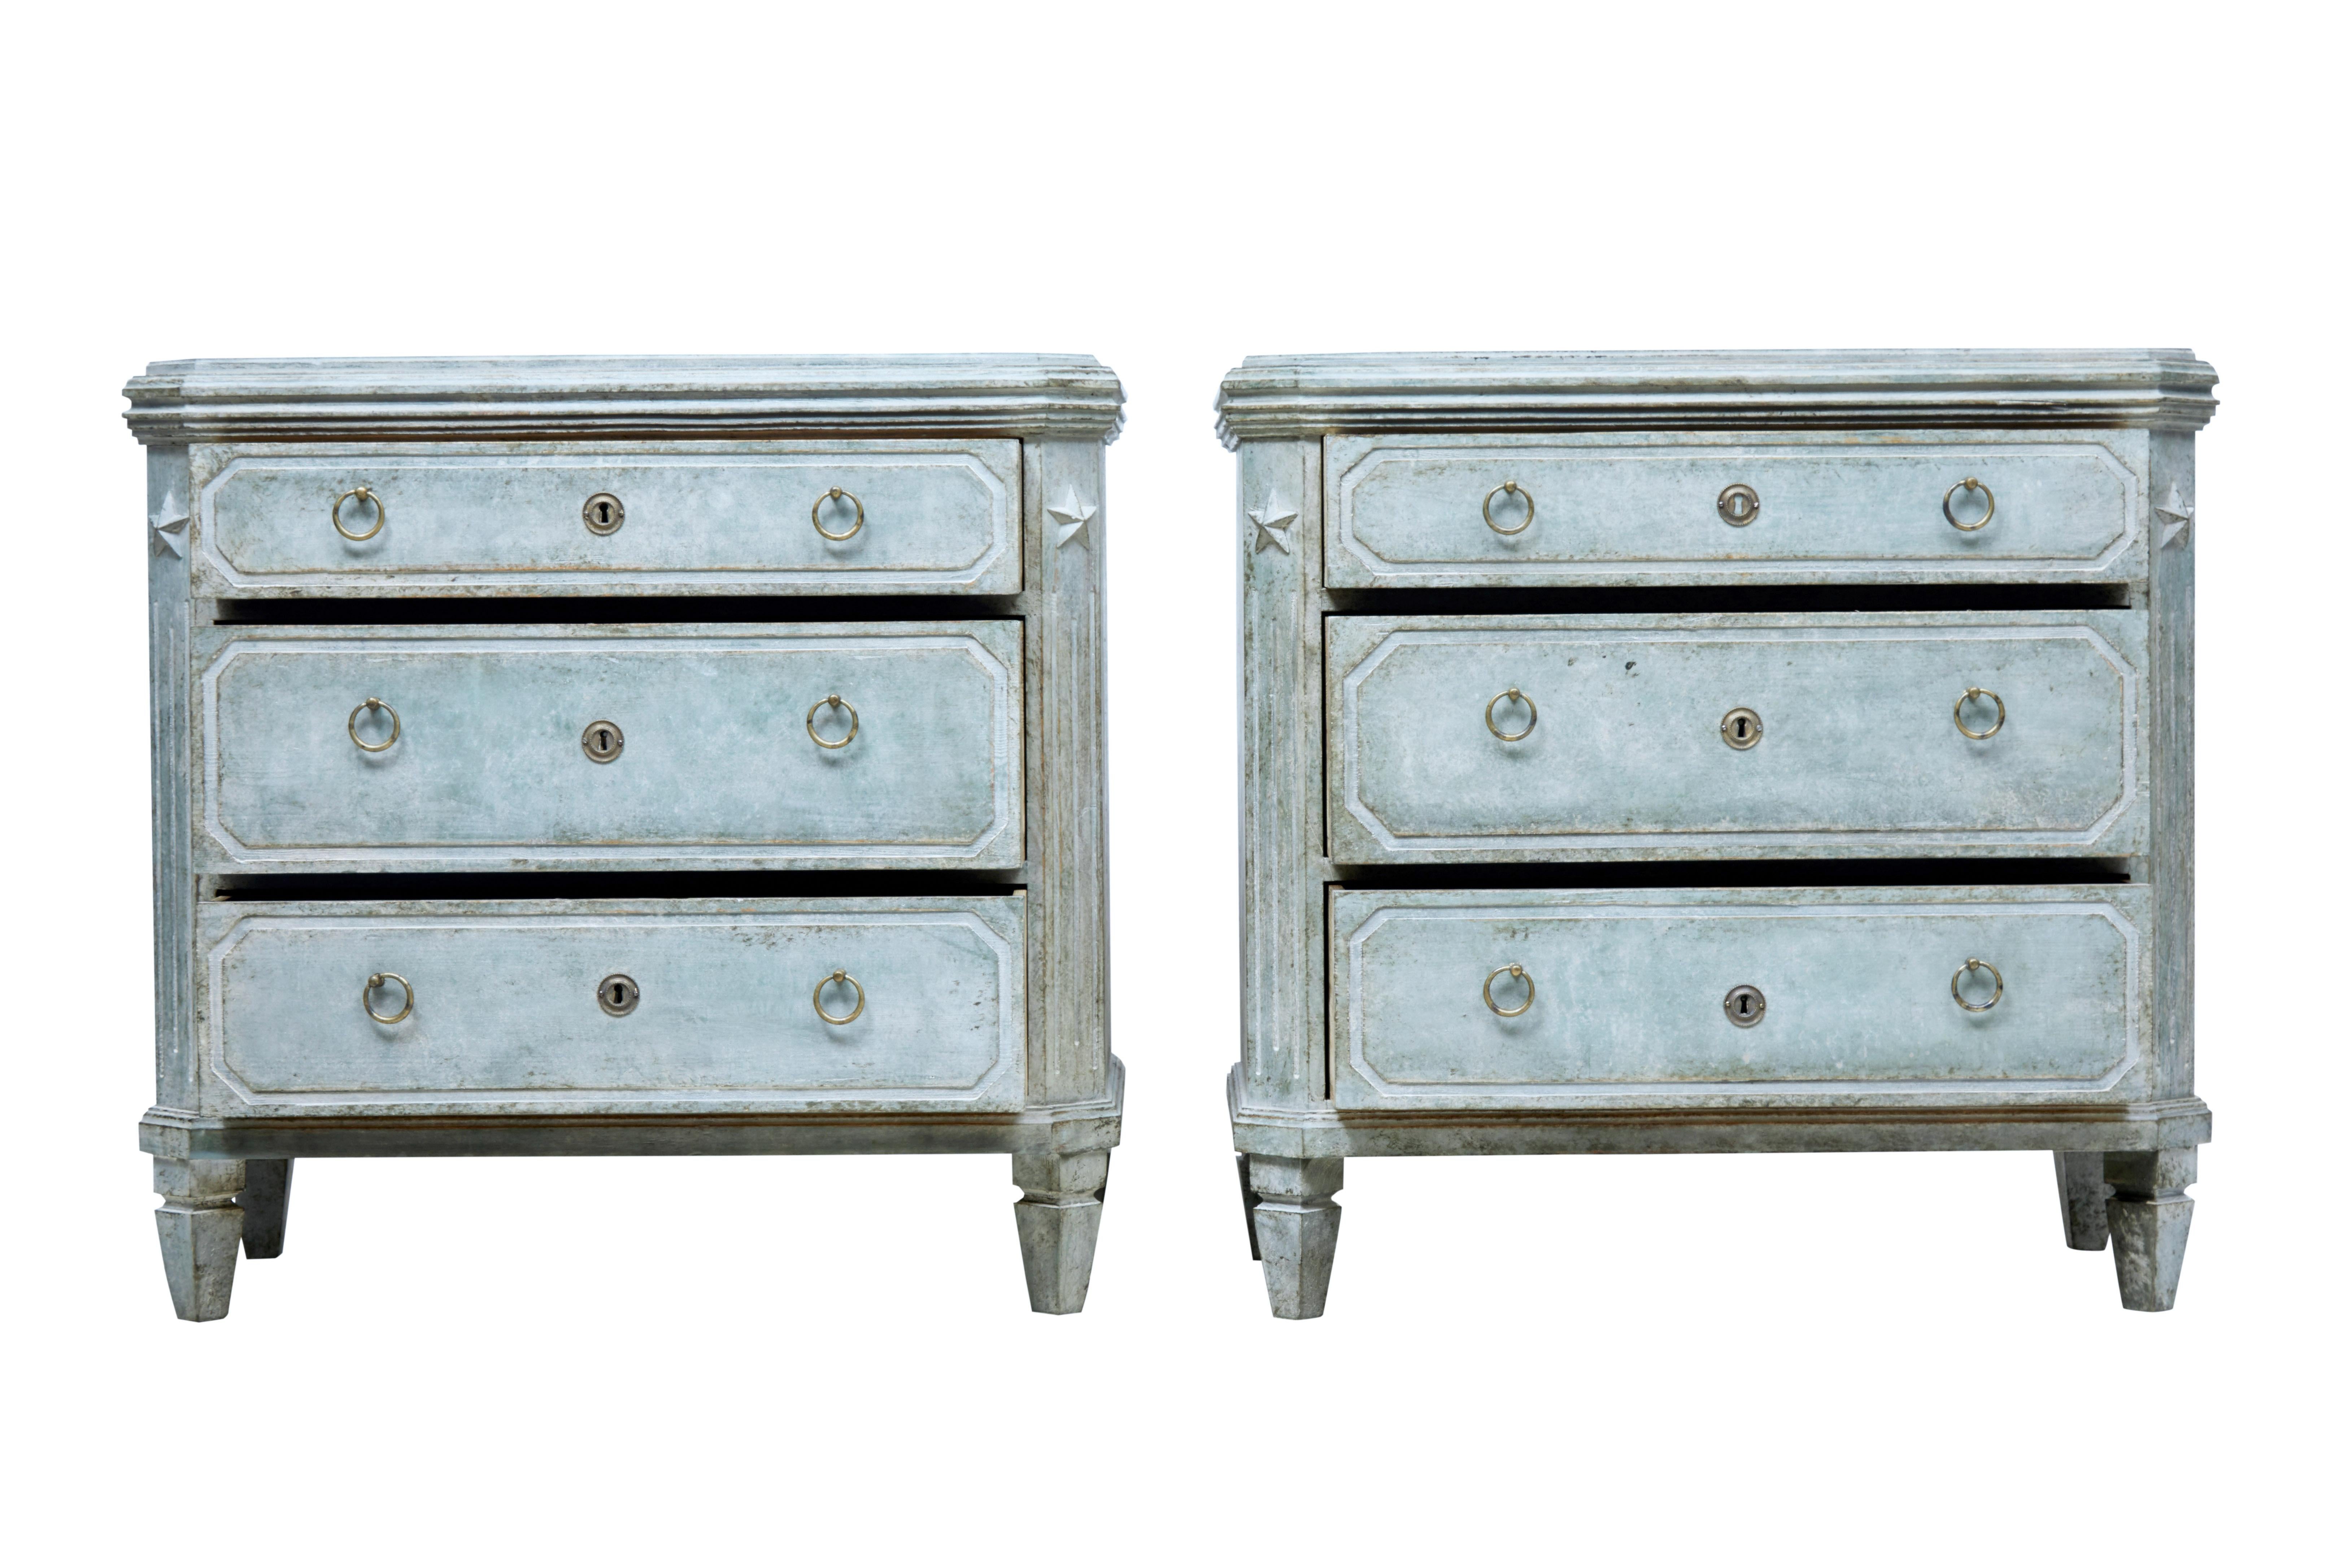 Fine pair of Gustavian style commodes, circa 1870.

3 graduating drawers fitted with simple brass ring handles. Over sailing stepped top surface. Canted corners with fluted detail and applied star motif.

Later green paint which has now taken on